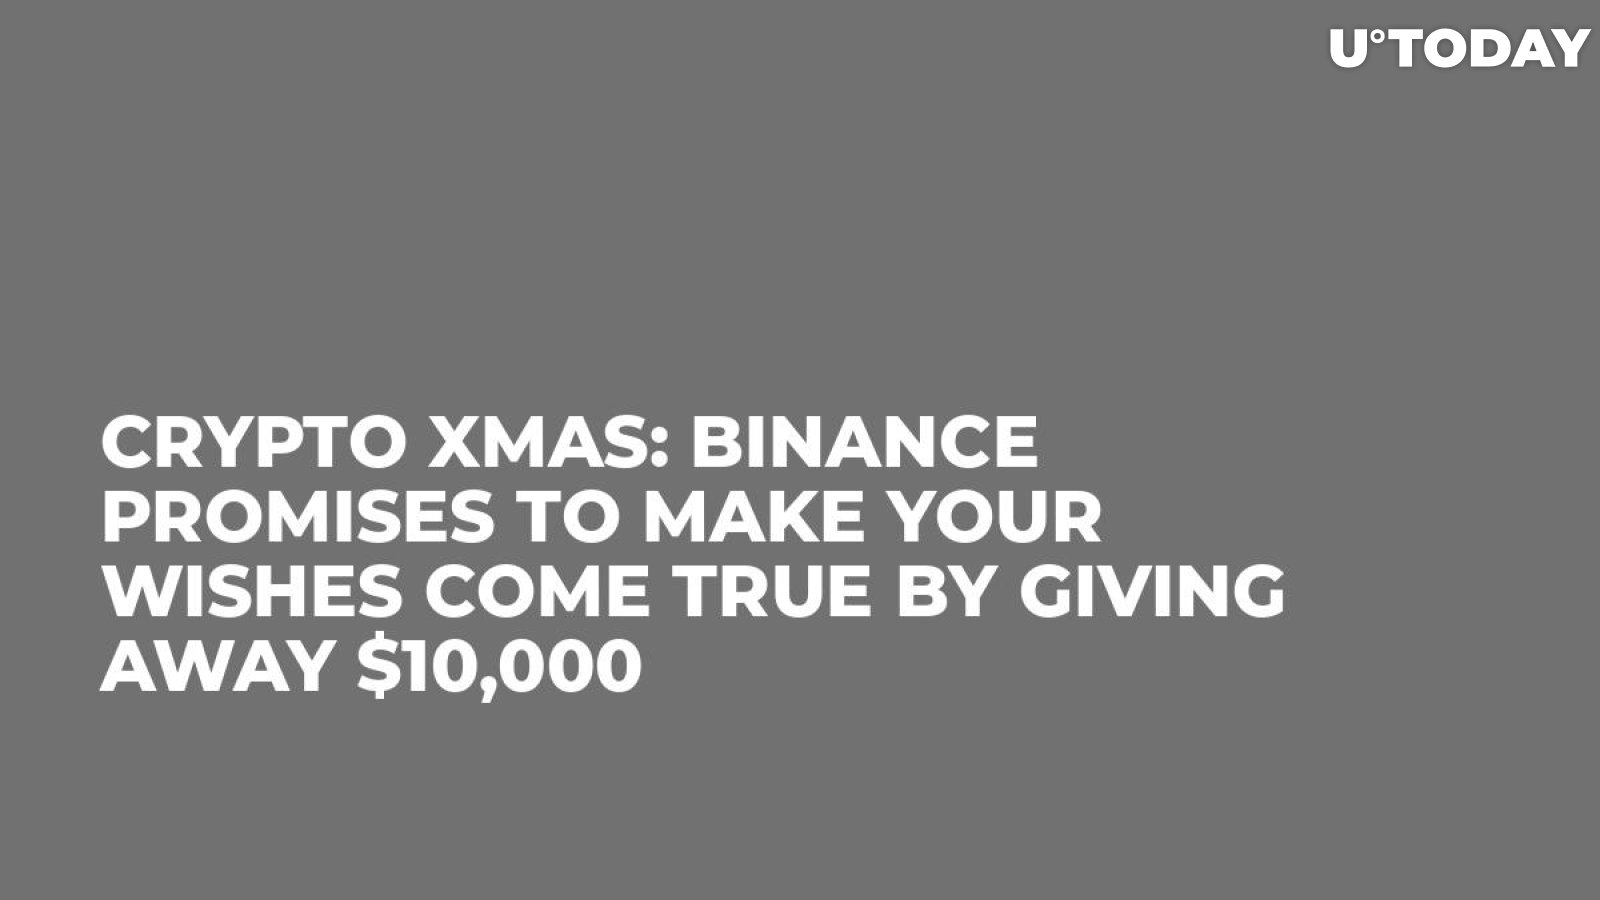 Crypto Xmas: Binance Promises to Make Your Wishes Come True by Giving Away $10,000